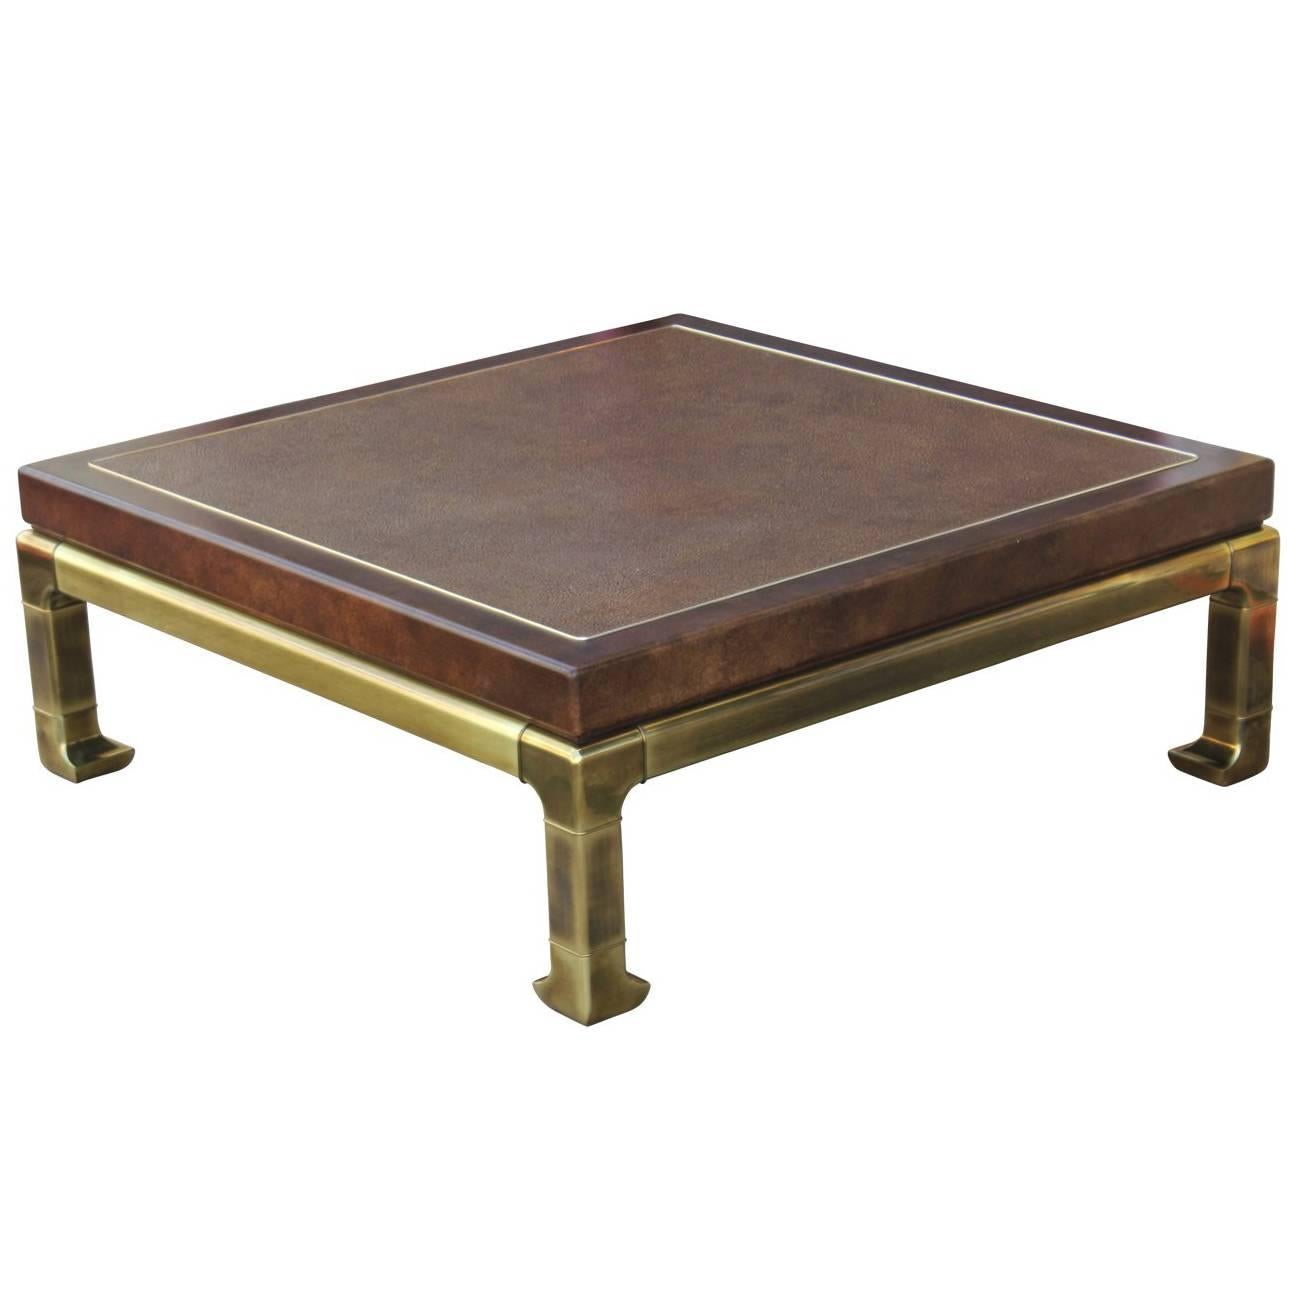 Modern Brass Coffee Table by Mastercraft with a Brown Lacquer Faux Skin Top